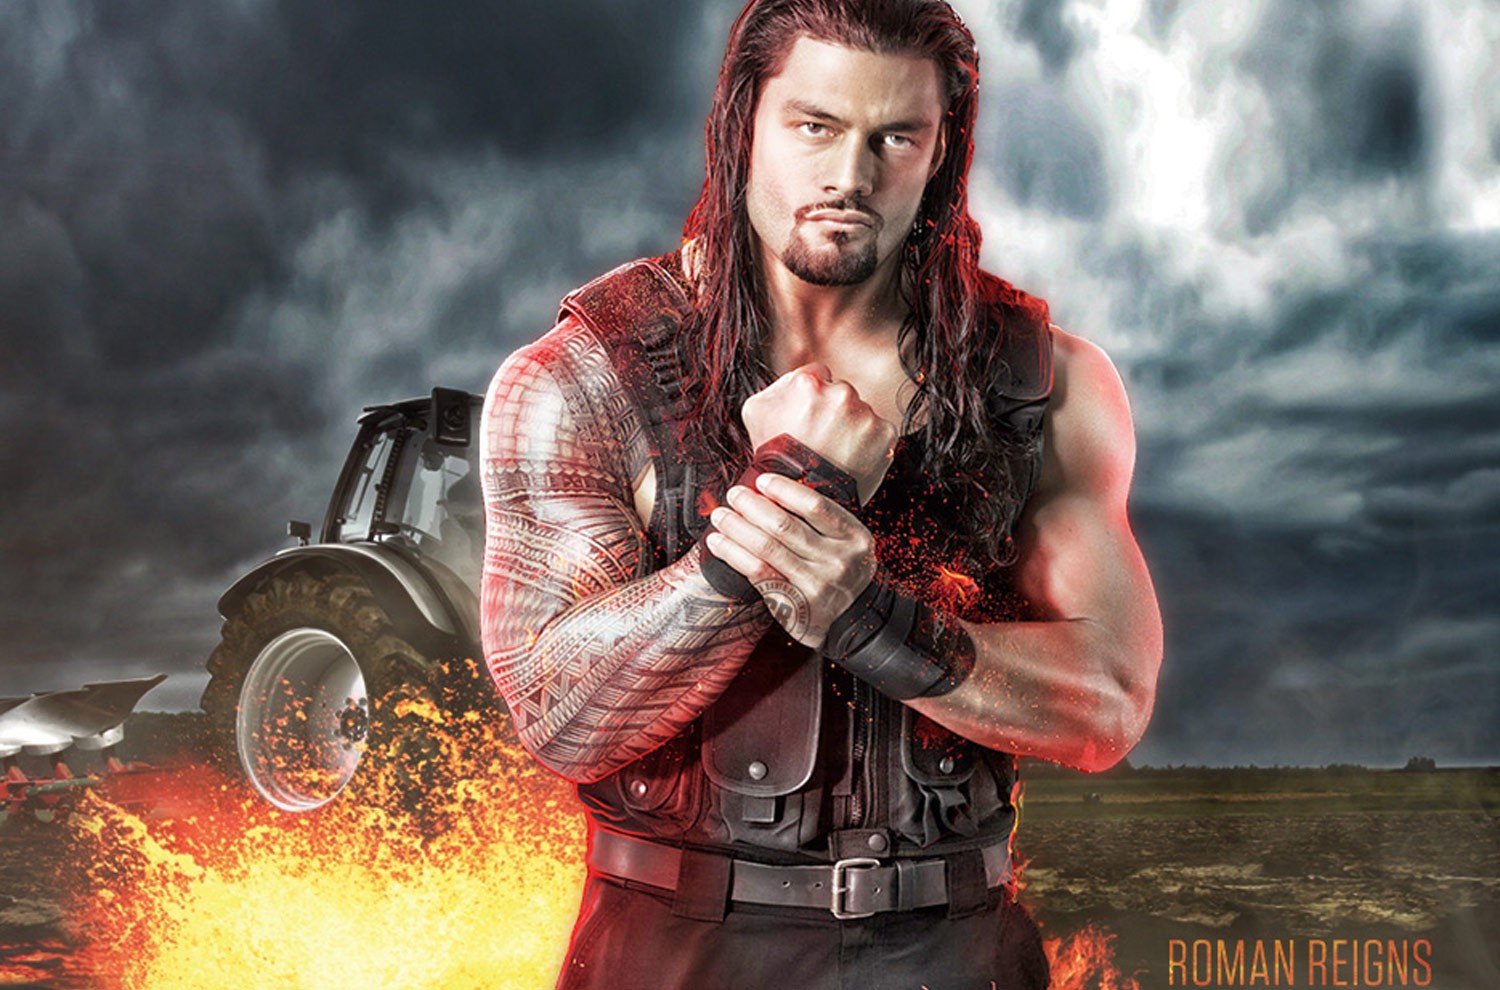 Free Download Roman Reigns Wwe Superstar Full Hd Wallpapers For Your Pc And Mac 1500x990 For Your Desktop Mobile Tablet Explore 49 Wwe Wallpapers Of Roman Reigns Wwe Wallpaper